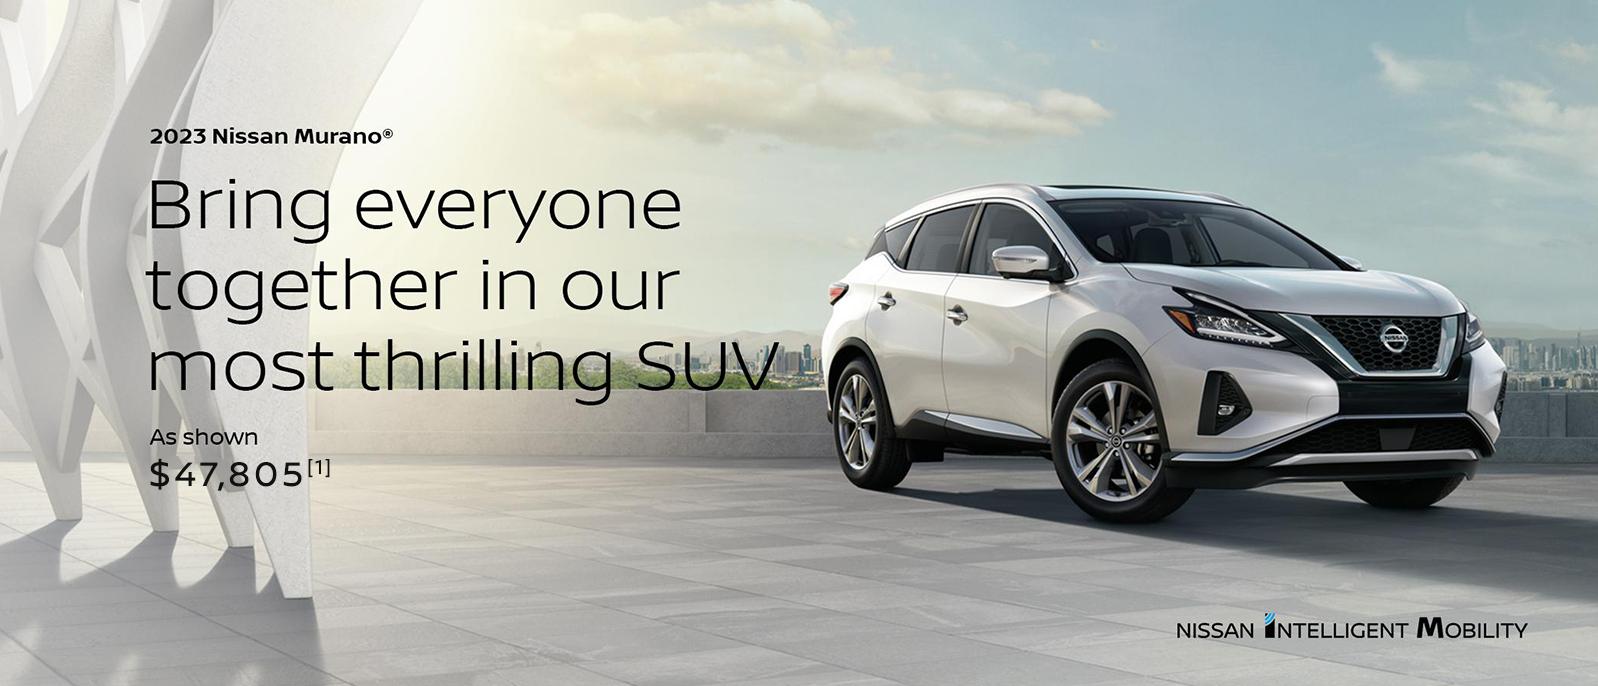 Bring everyone together in our most thrilling SUV